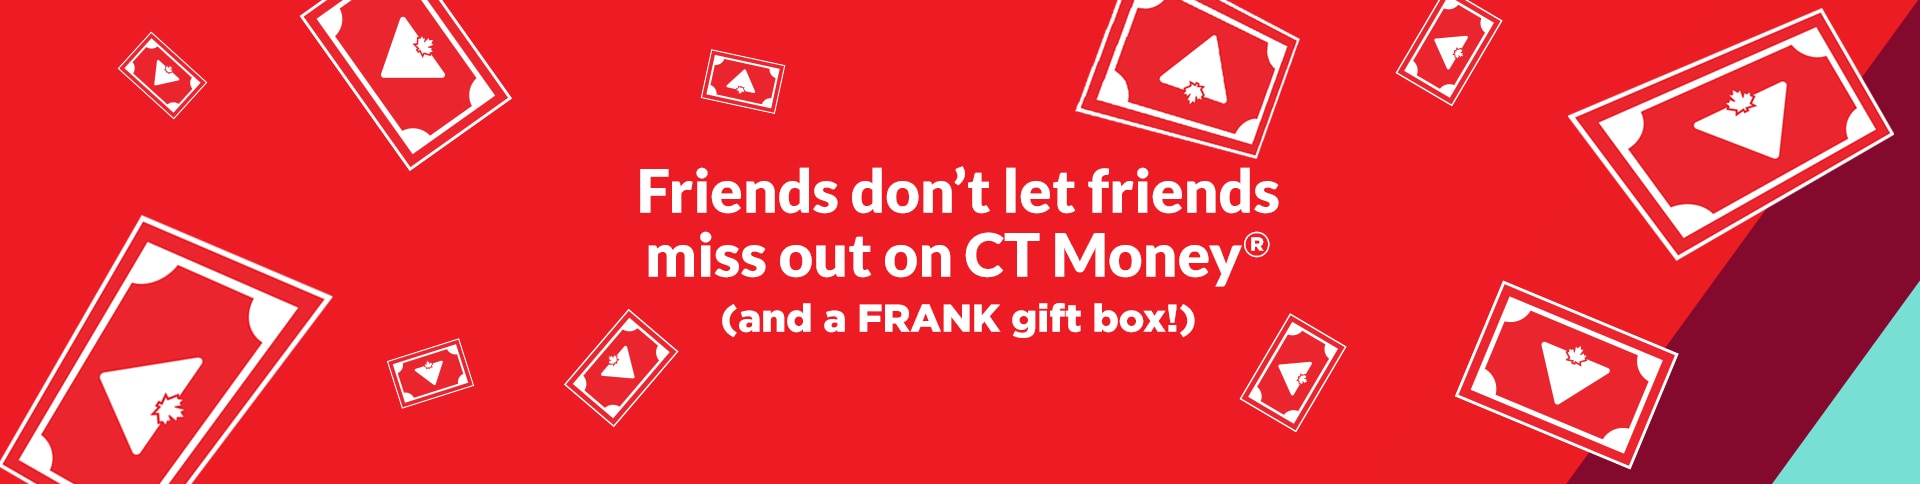 Friends don't let friends miss out on CT Money